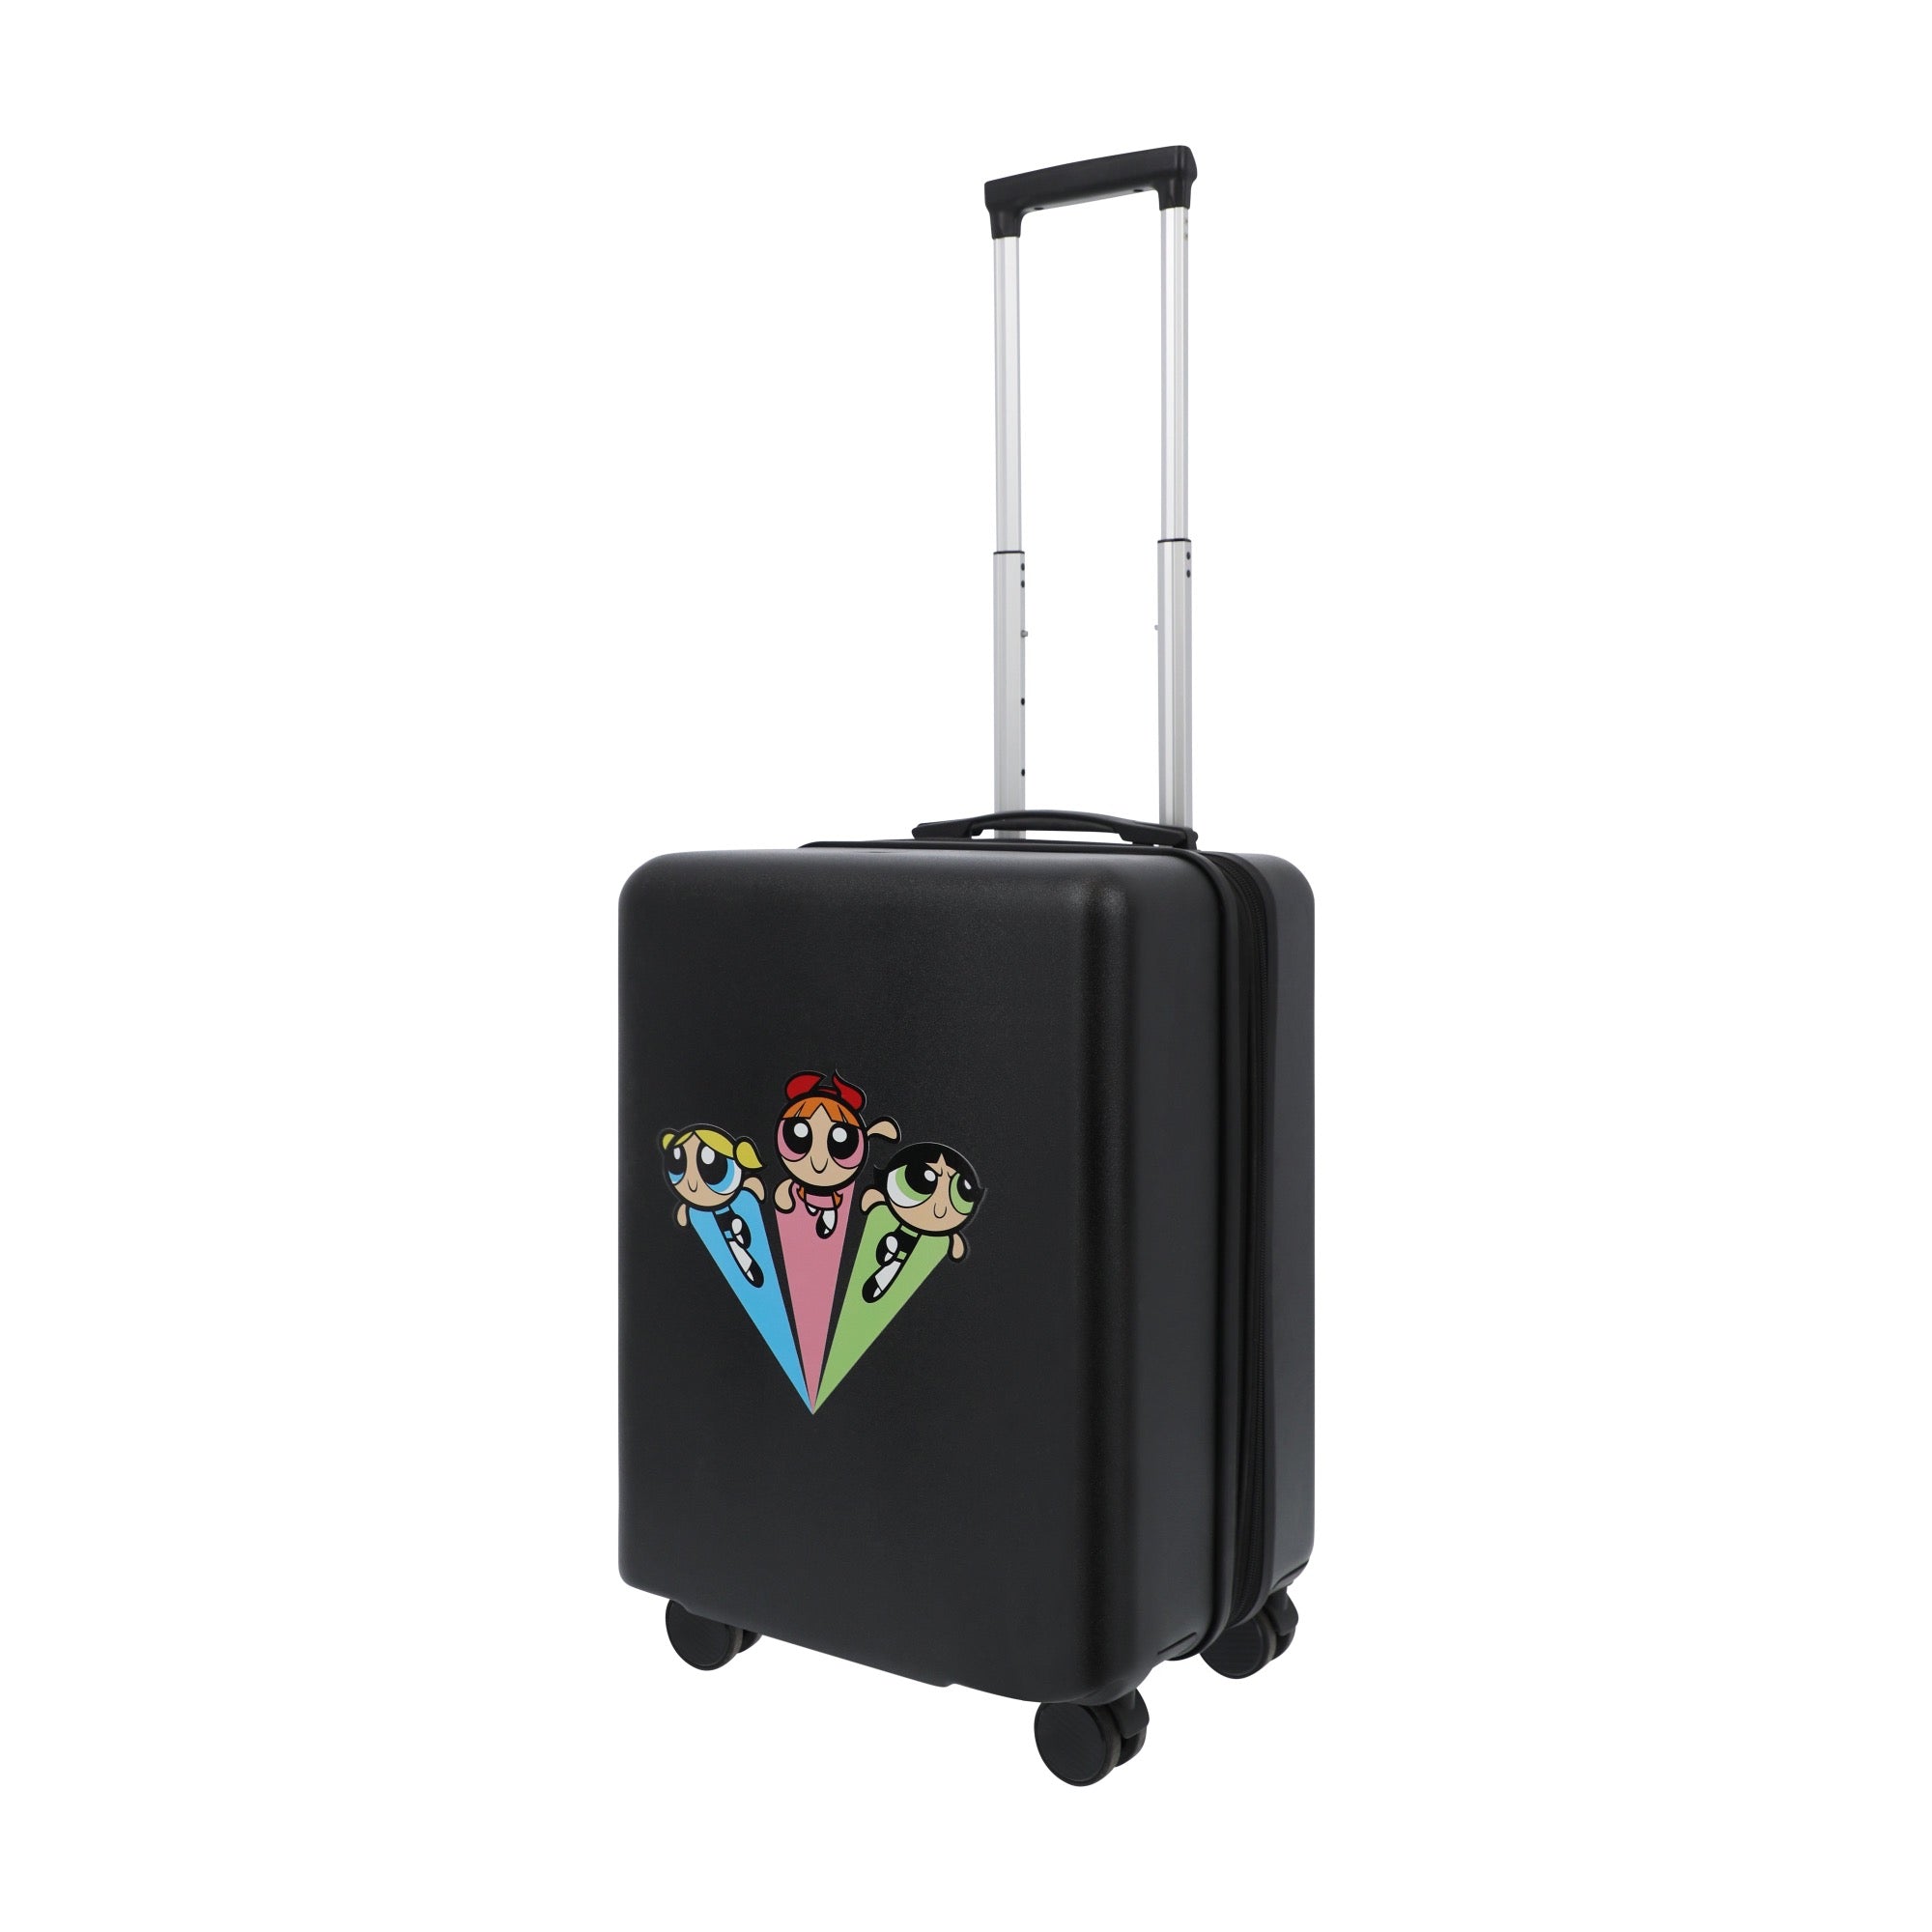 Black WB powerpuff girls 22.5" carry-on spinner suitcase luggage by Ful